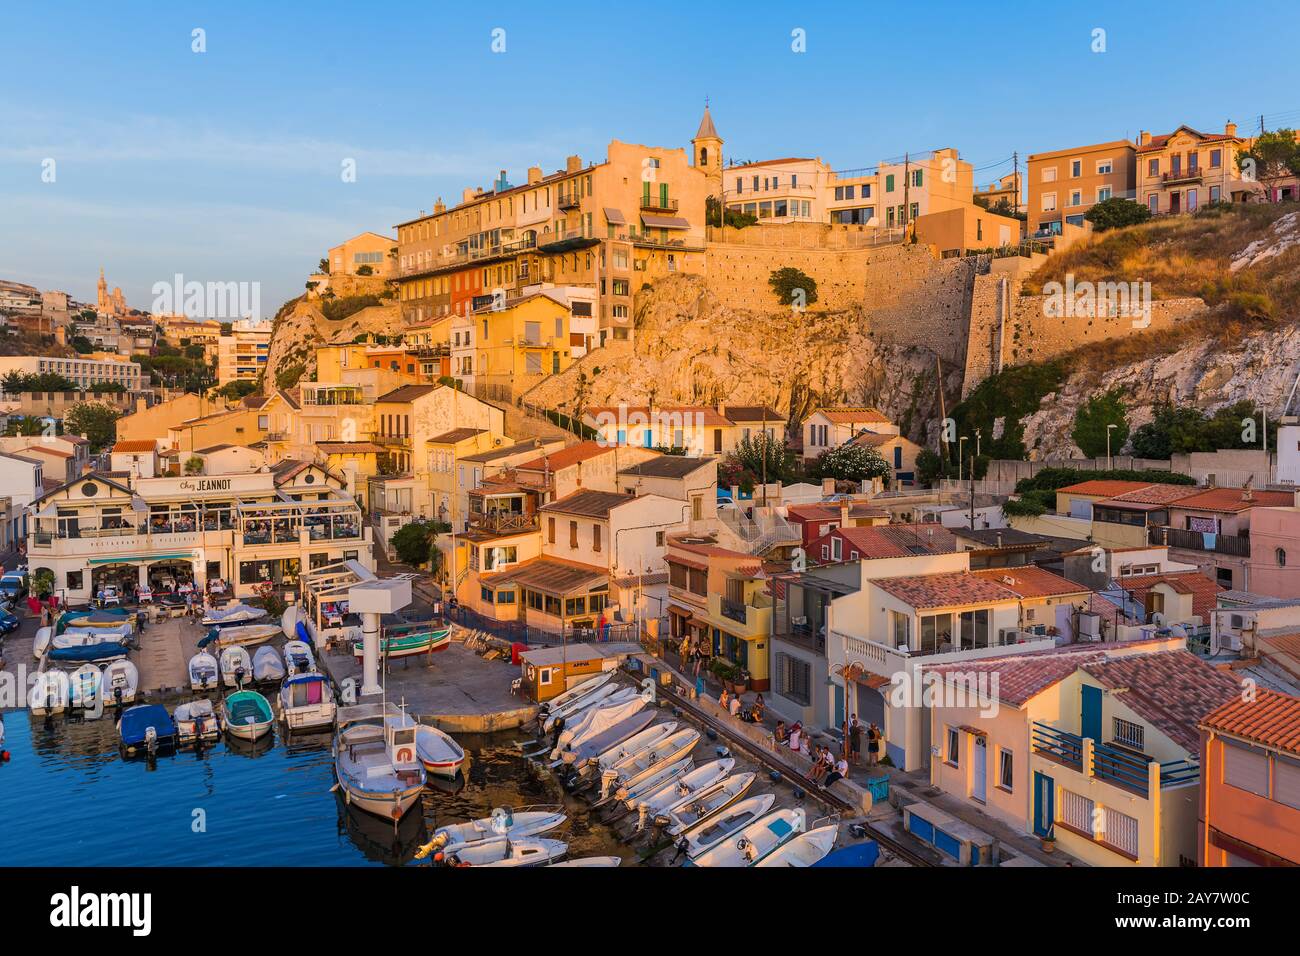 Marseille, France - August 03, 2017: Fishing boats in harbor Vallon des Auffes Stock Photo